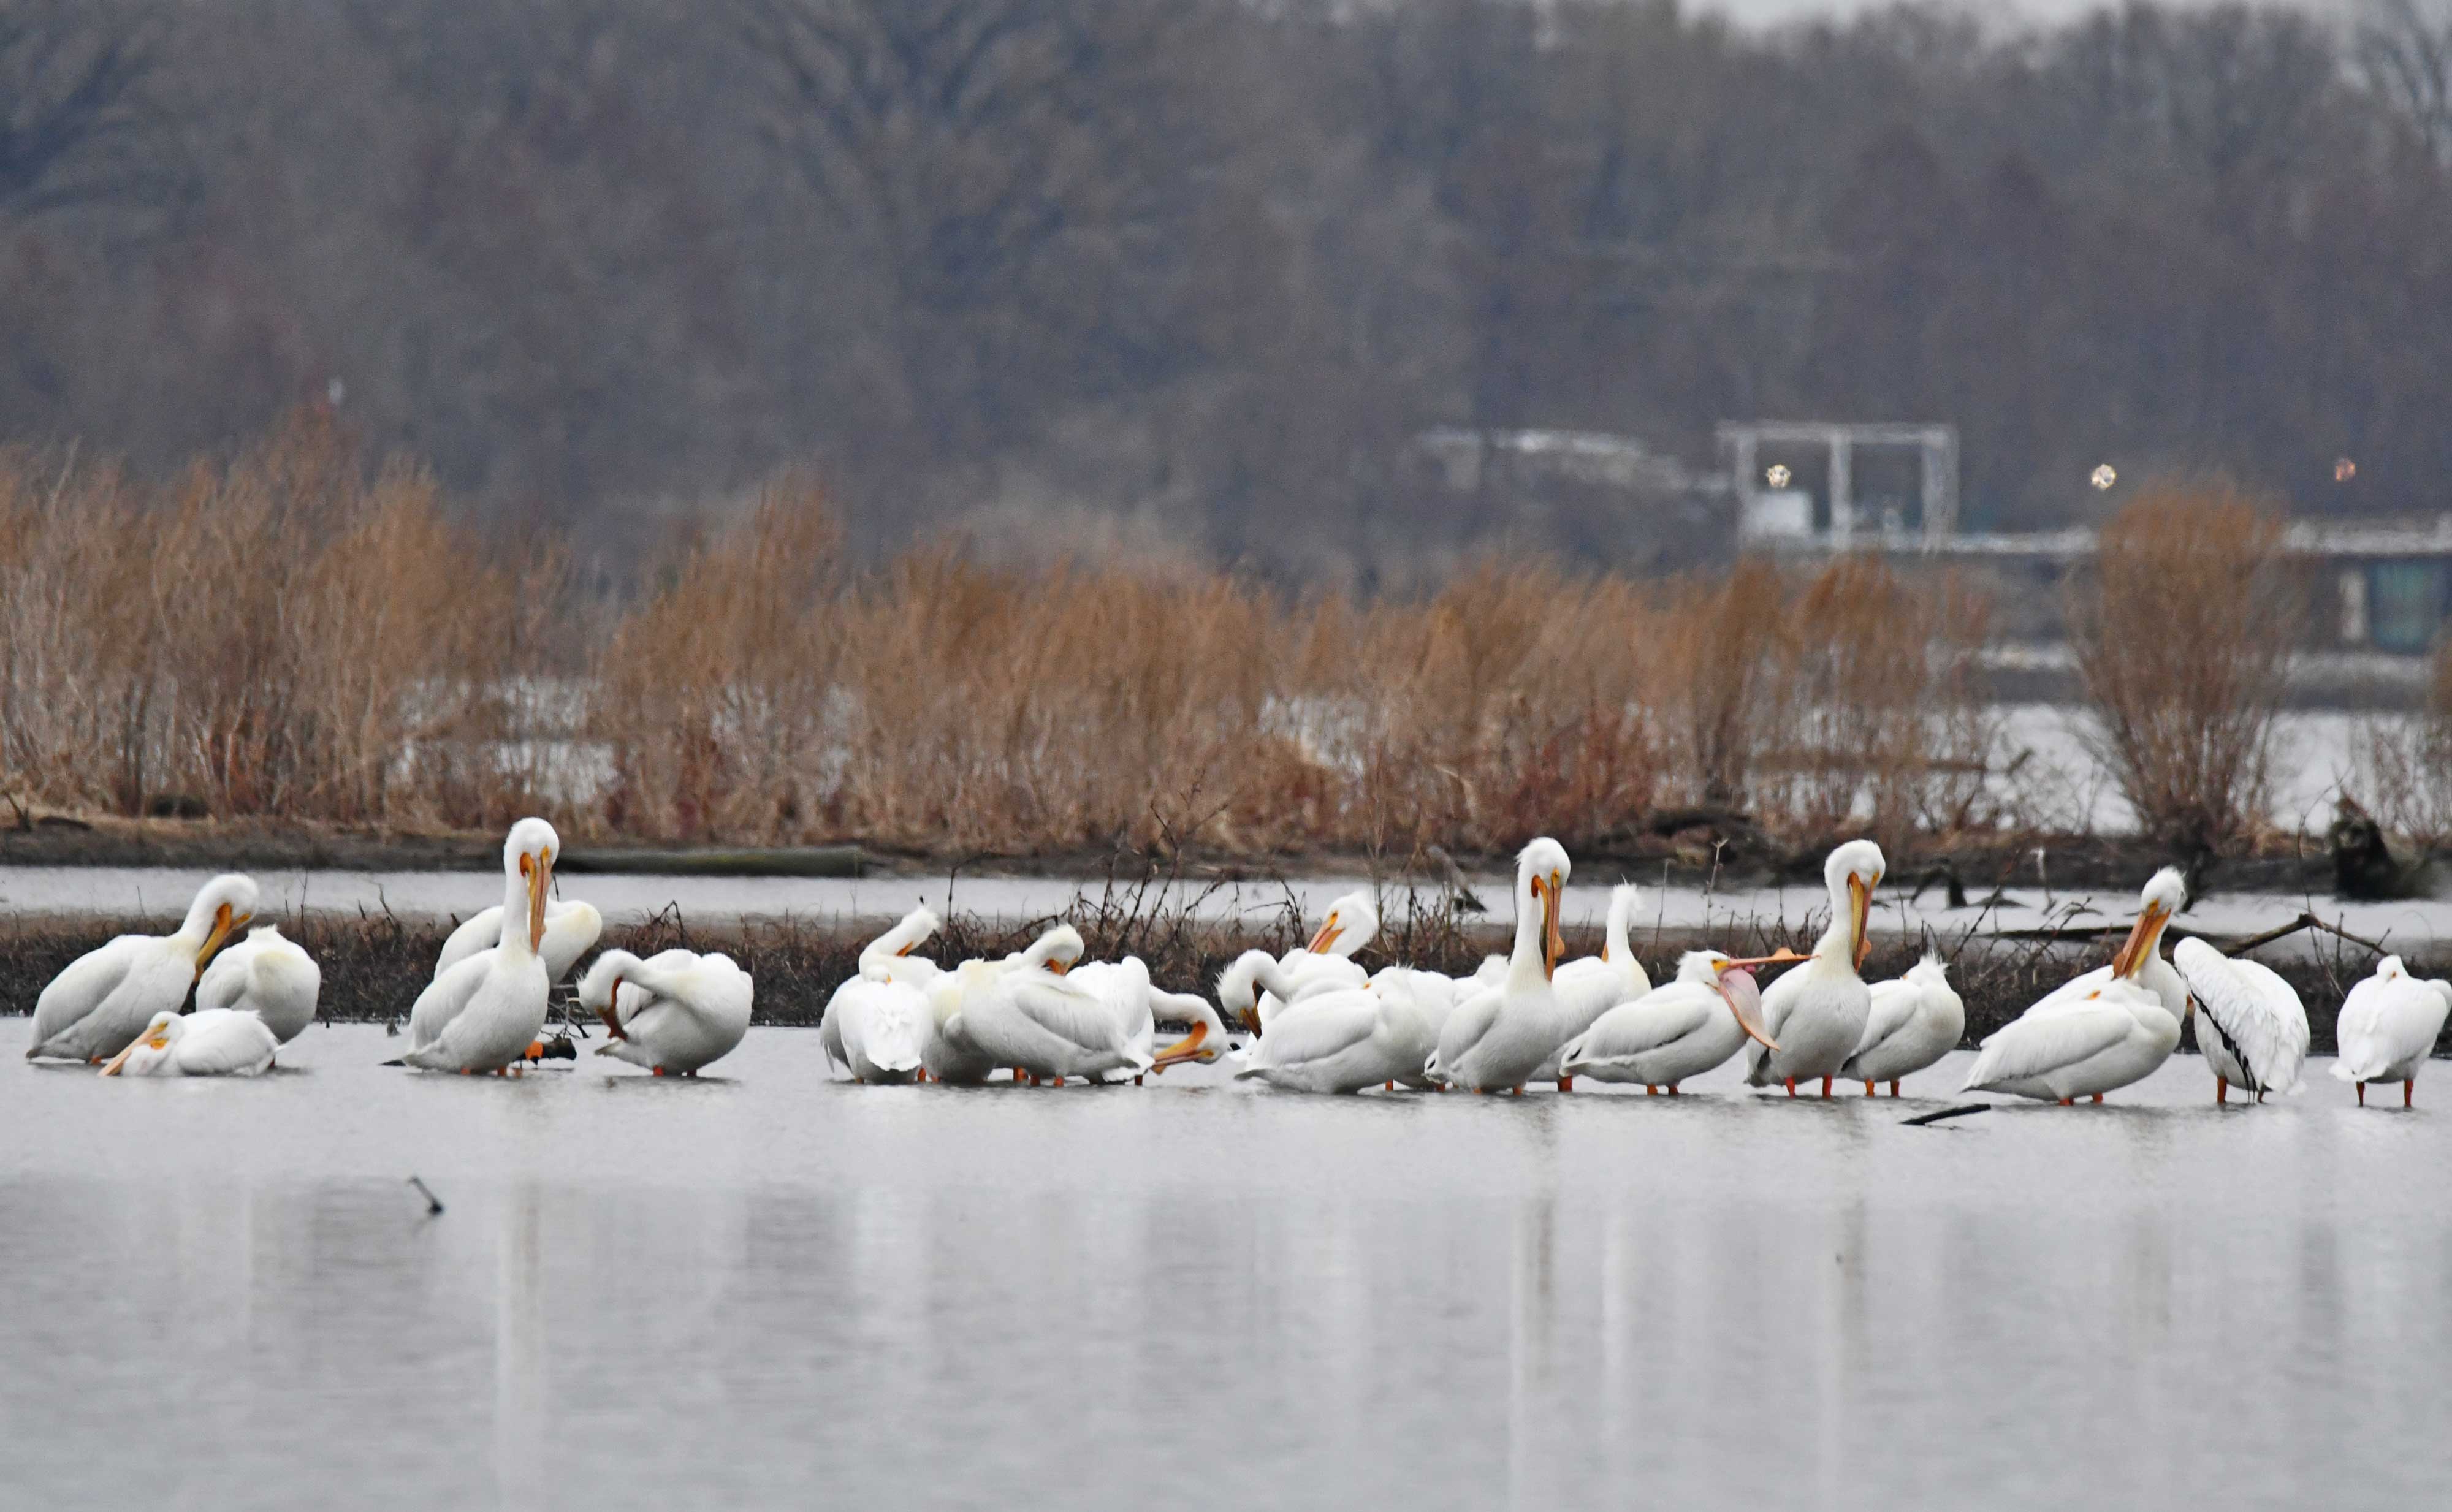 A group of American white pelicans swimming in water.